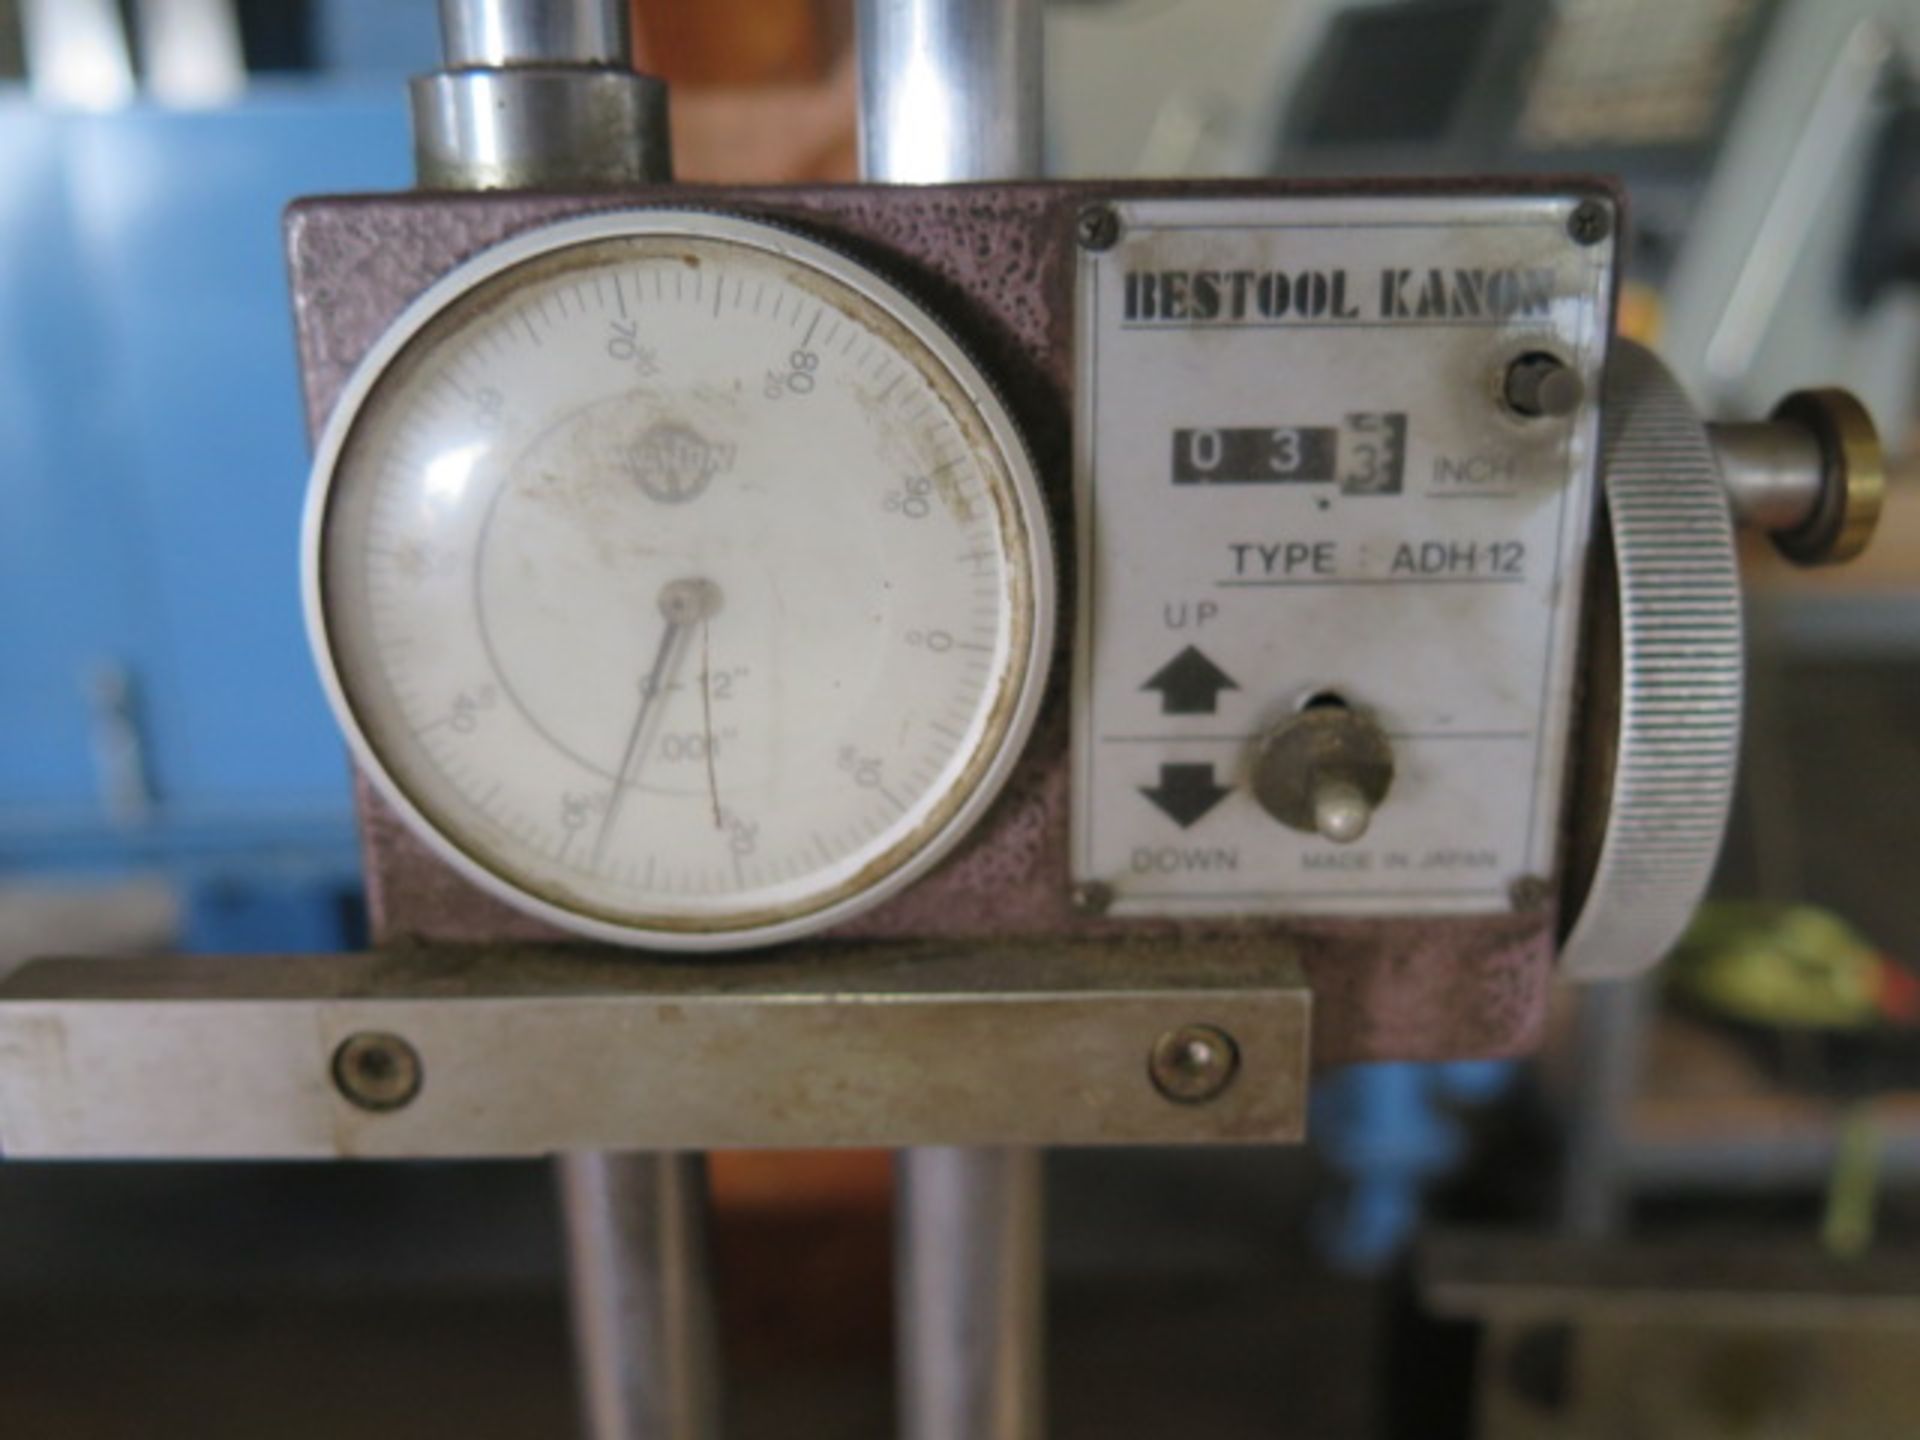 Bestool 12" Dial Height Gage and Mitutoyo 10" Vernier Height Gage (SOLD AS-IS - NO WARRANTY) - Image 2 of 4